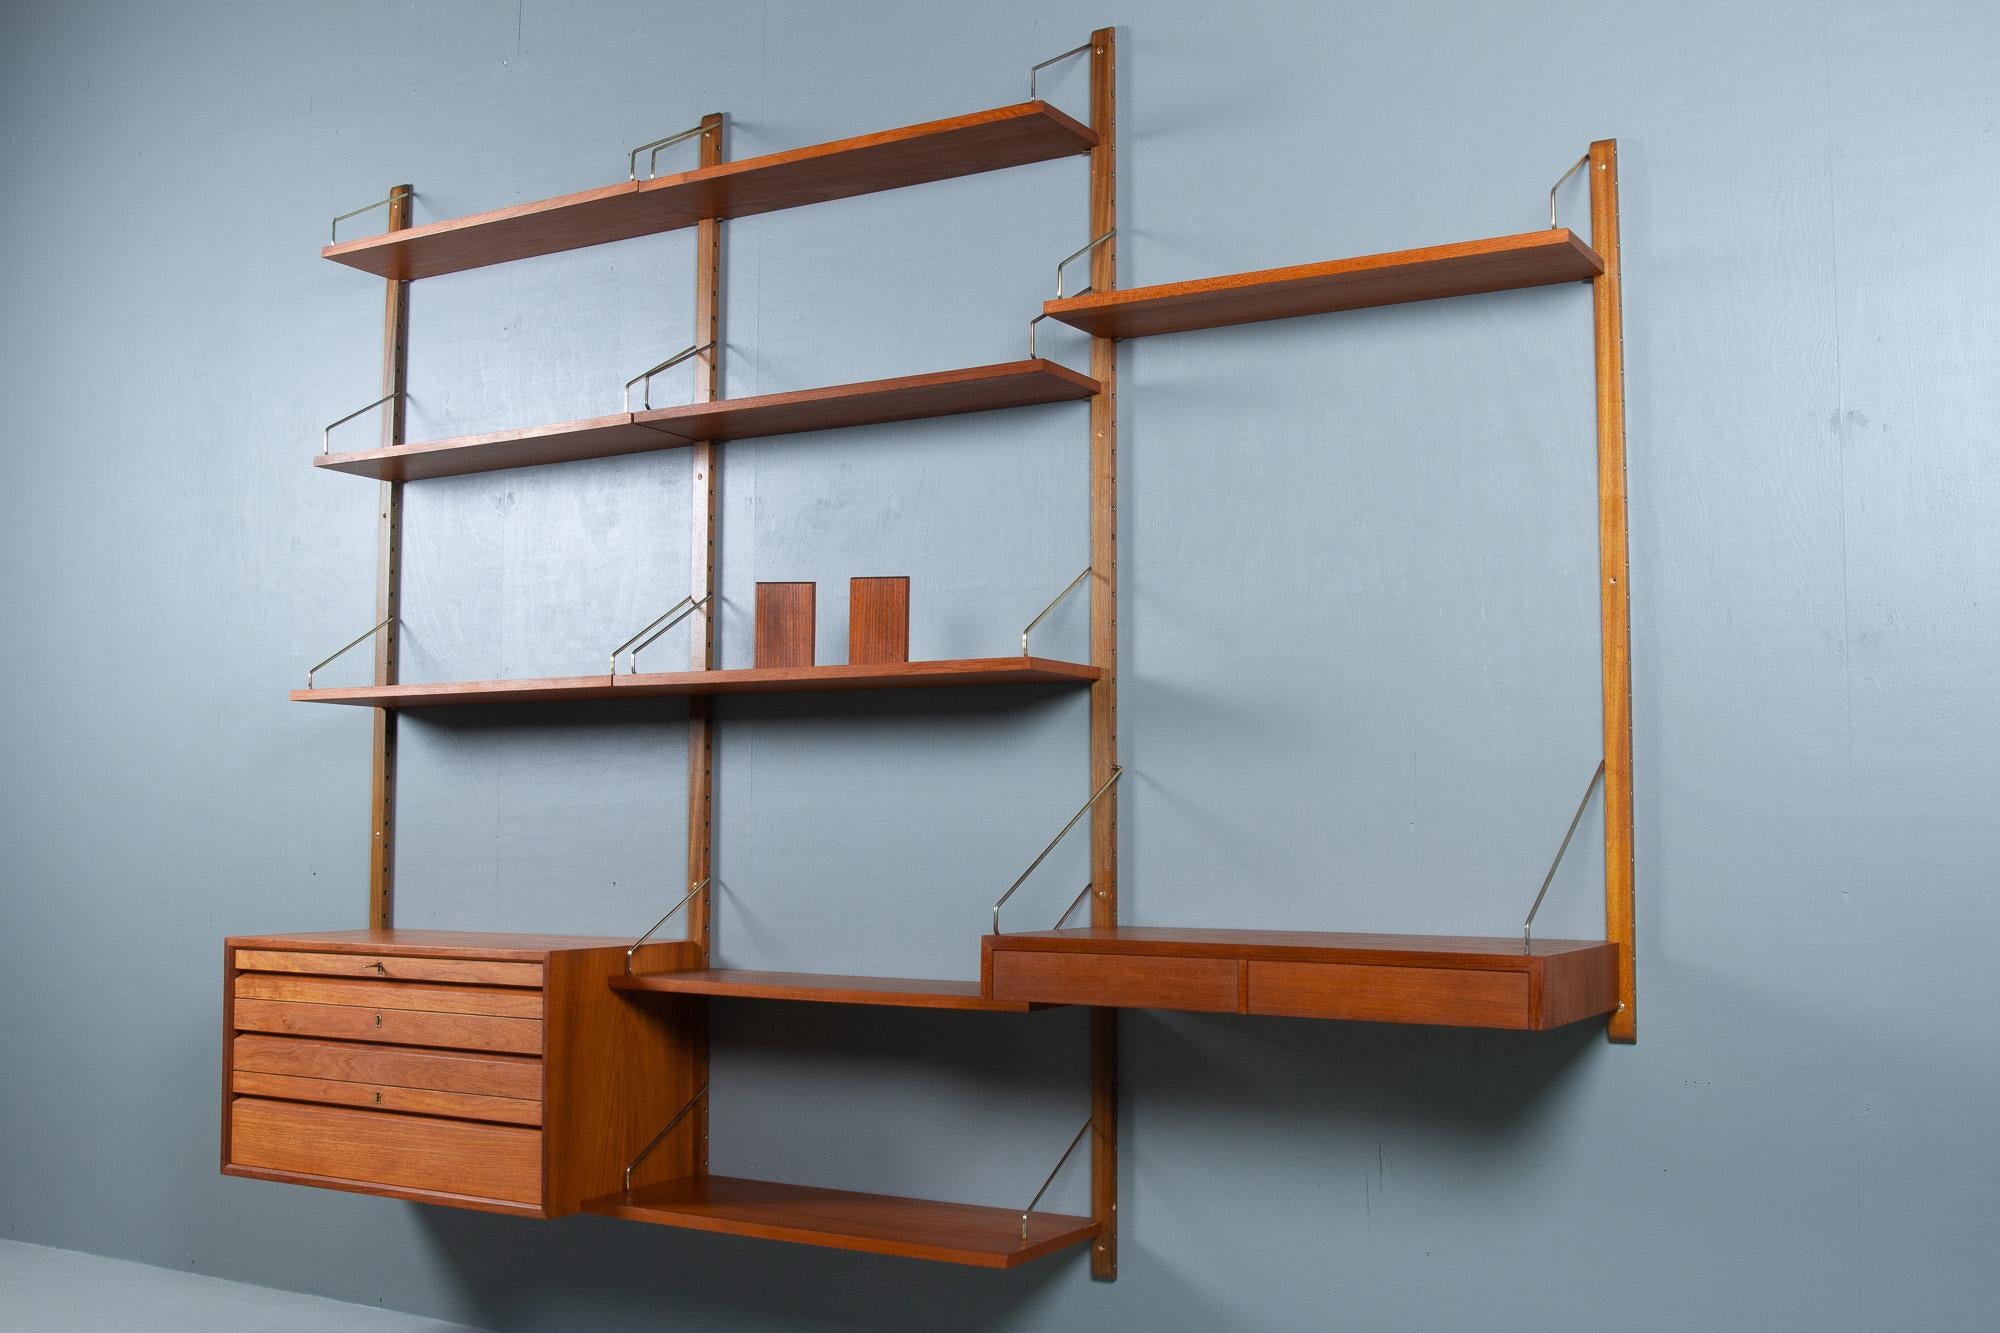 Vintage Danish teak wall unit by Poul Cadovius for Cado, 1960s.

Mid-Century Modern 3 bay shelving system model Royal. This is a original vintage floating bookcase designed in 1948 by Danish architect Poul Cadovius. 
Cadovius had the revolutionary